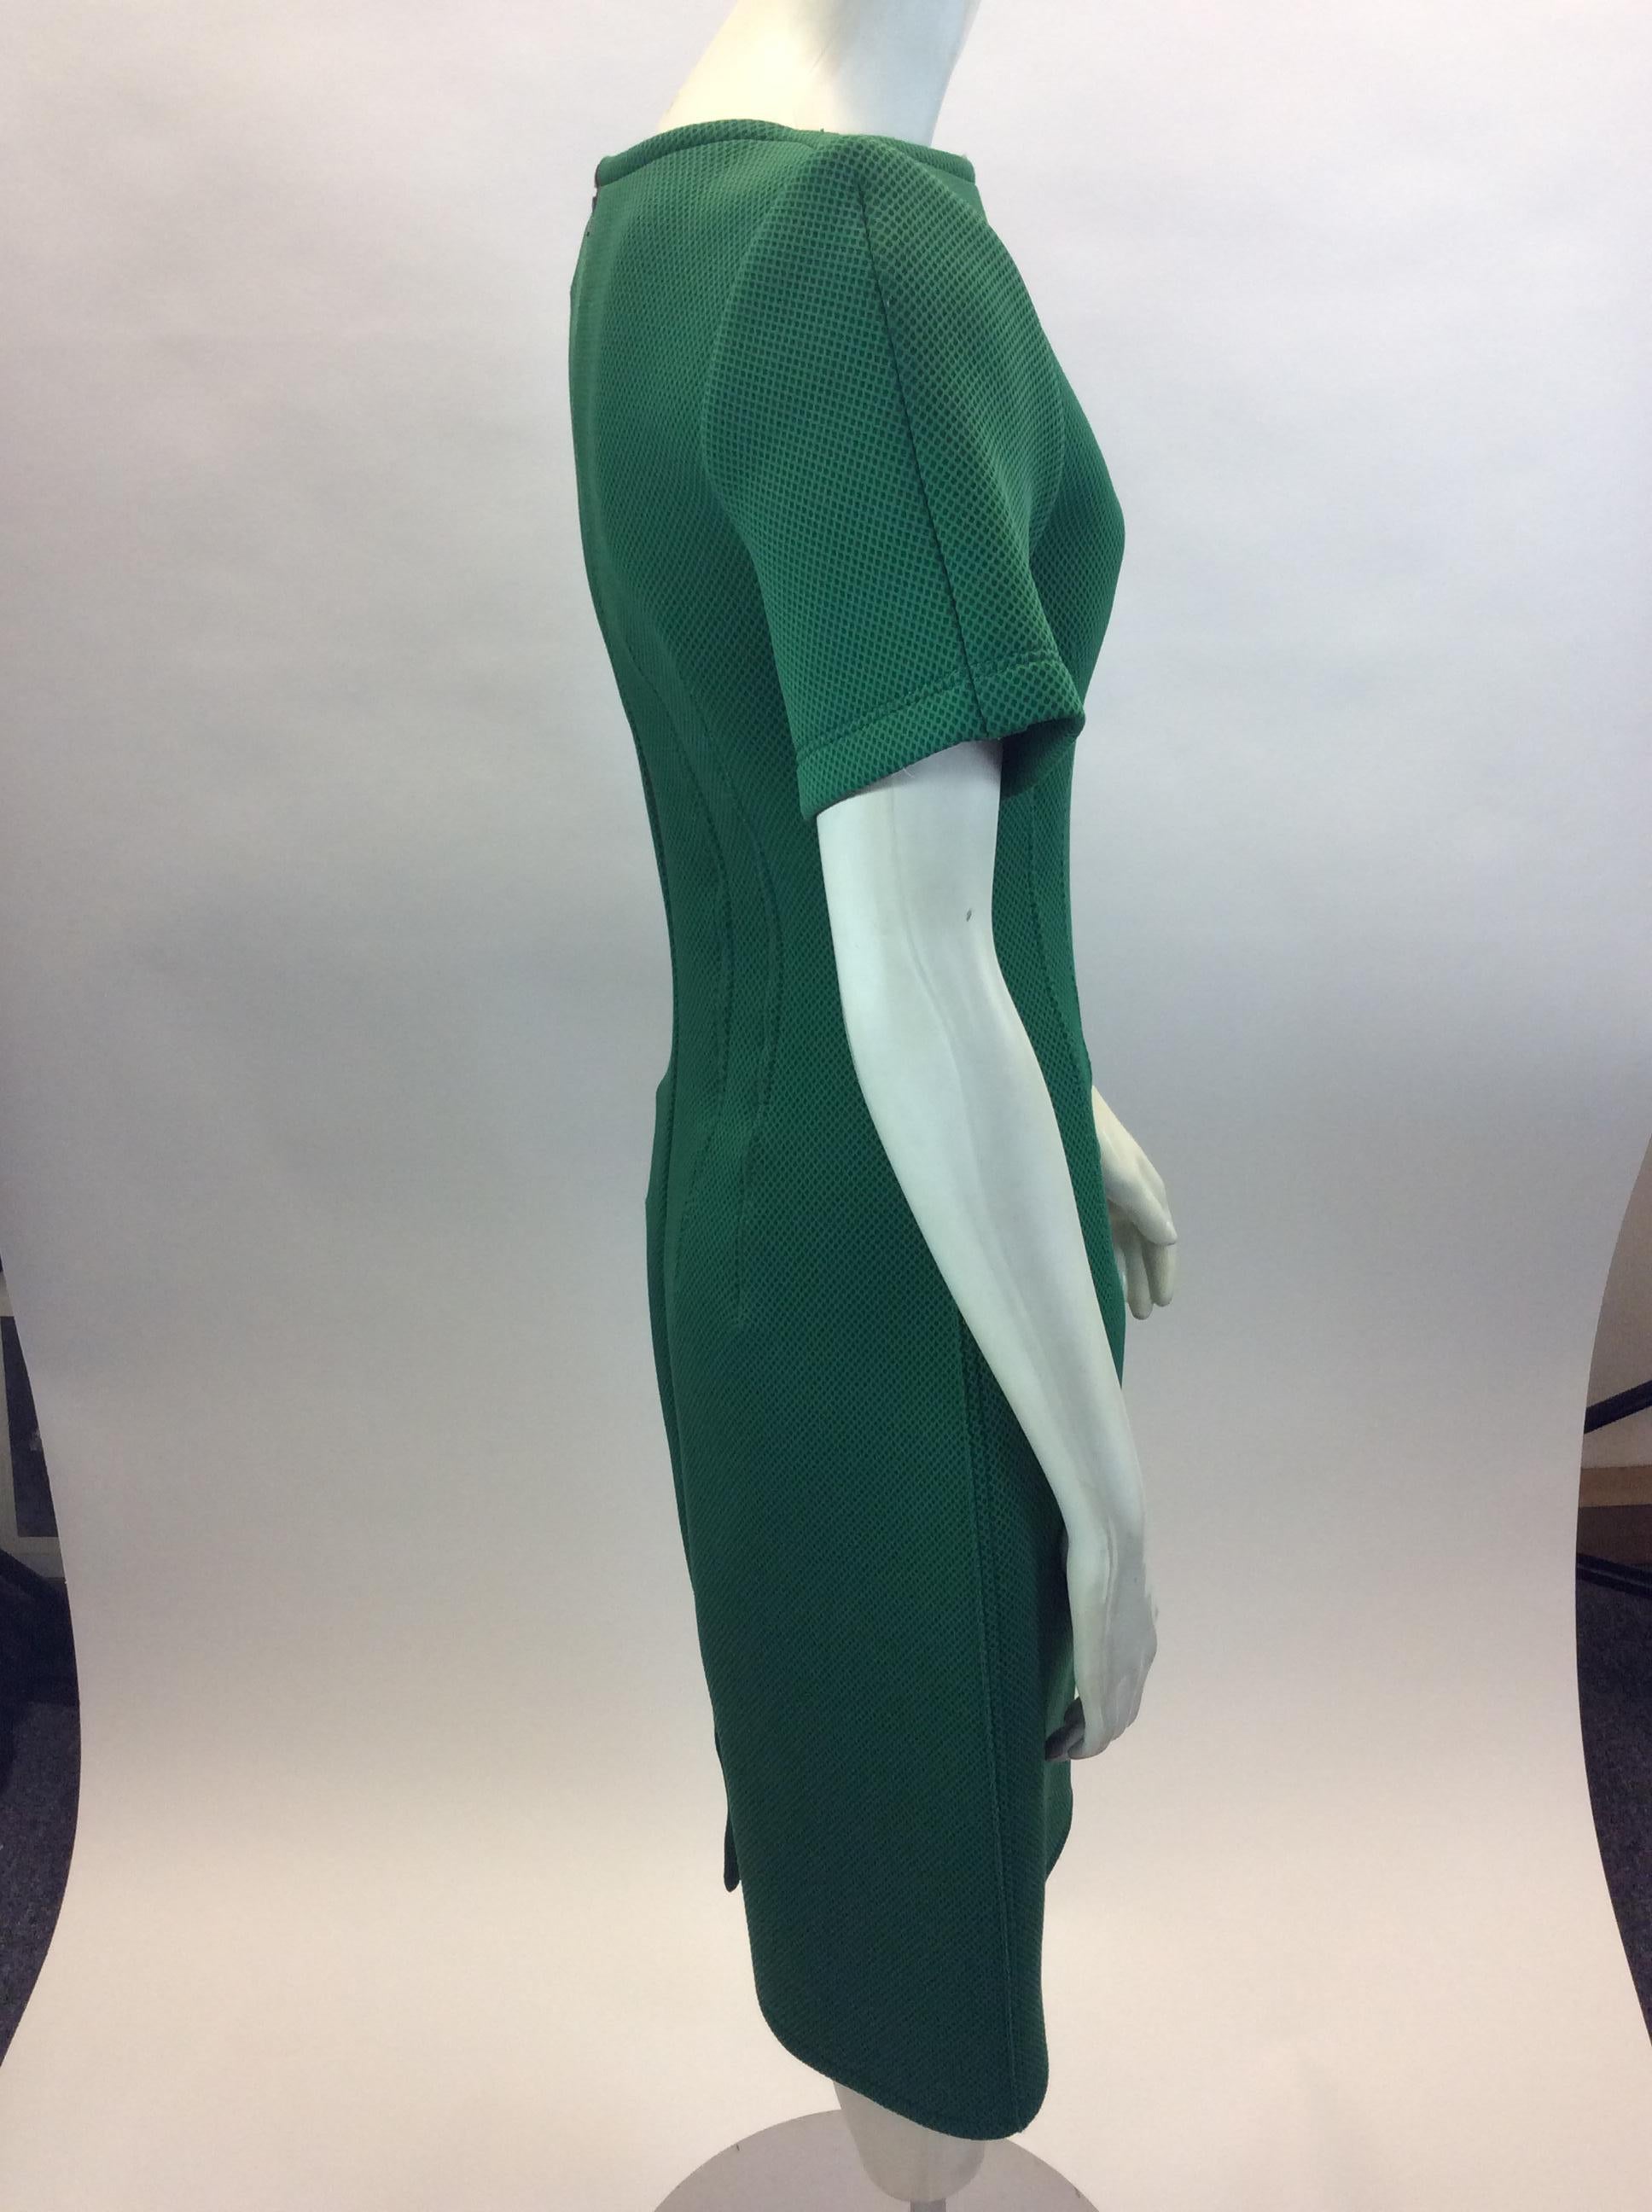 Lanvin Bright Green Short Sleeve Dress In Good Condition For Sale In Narberth, PA